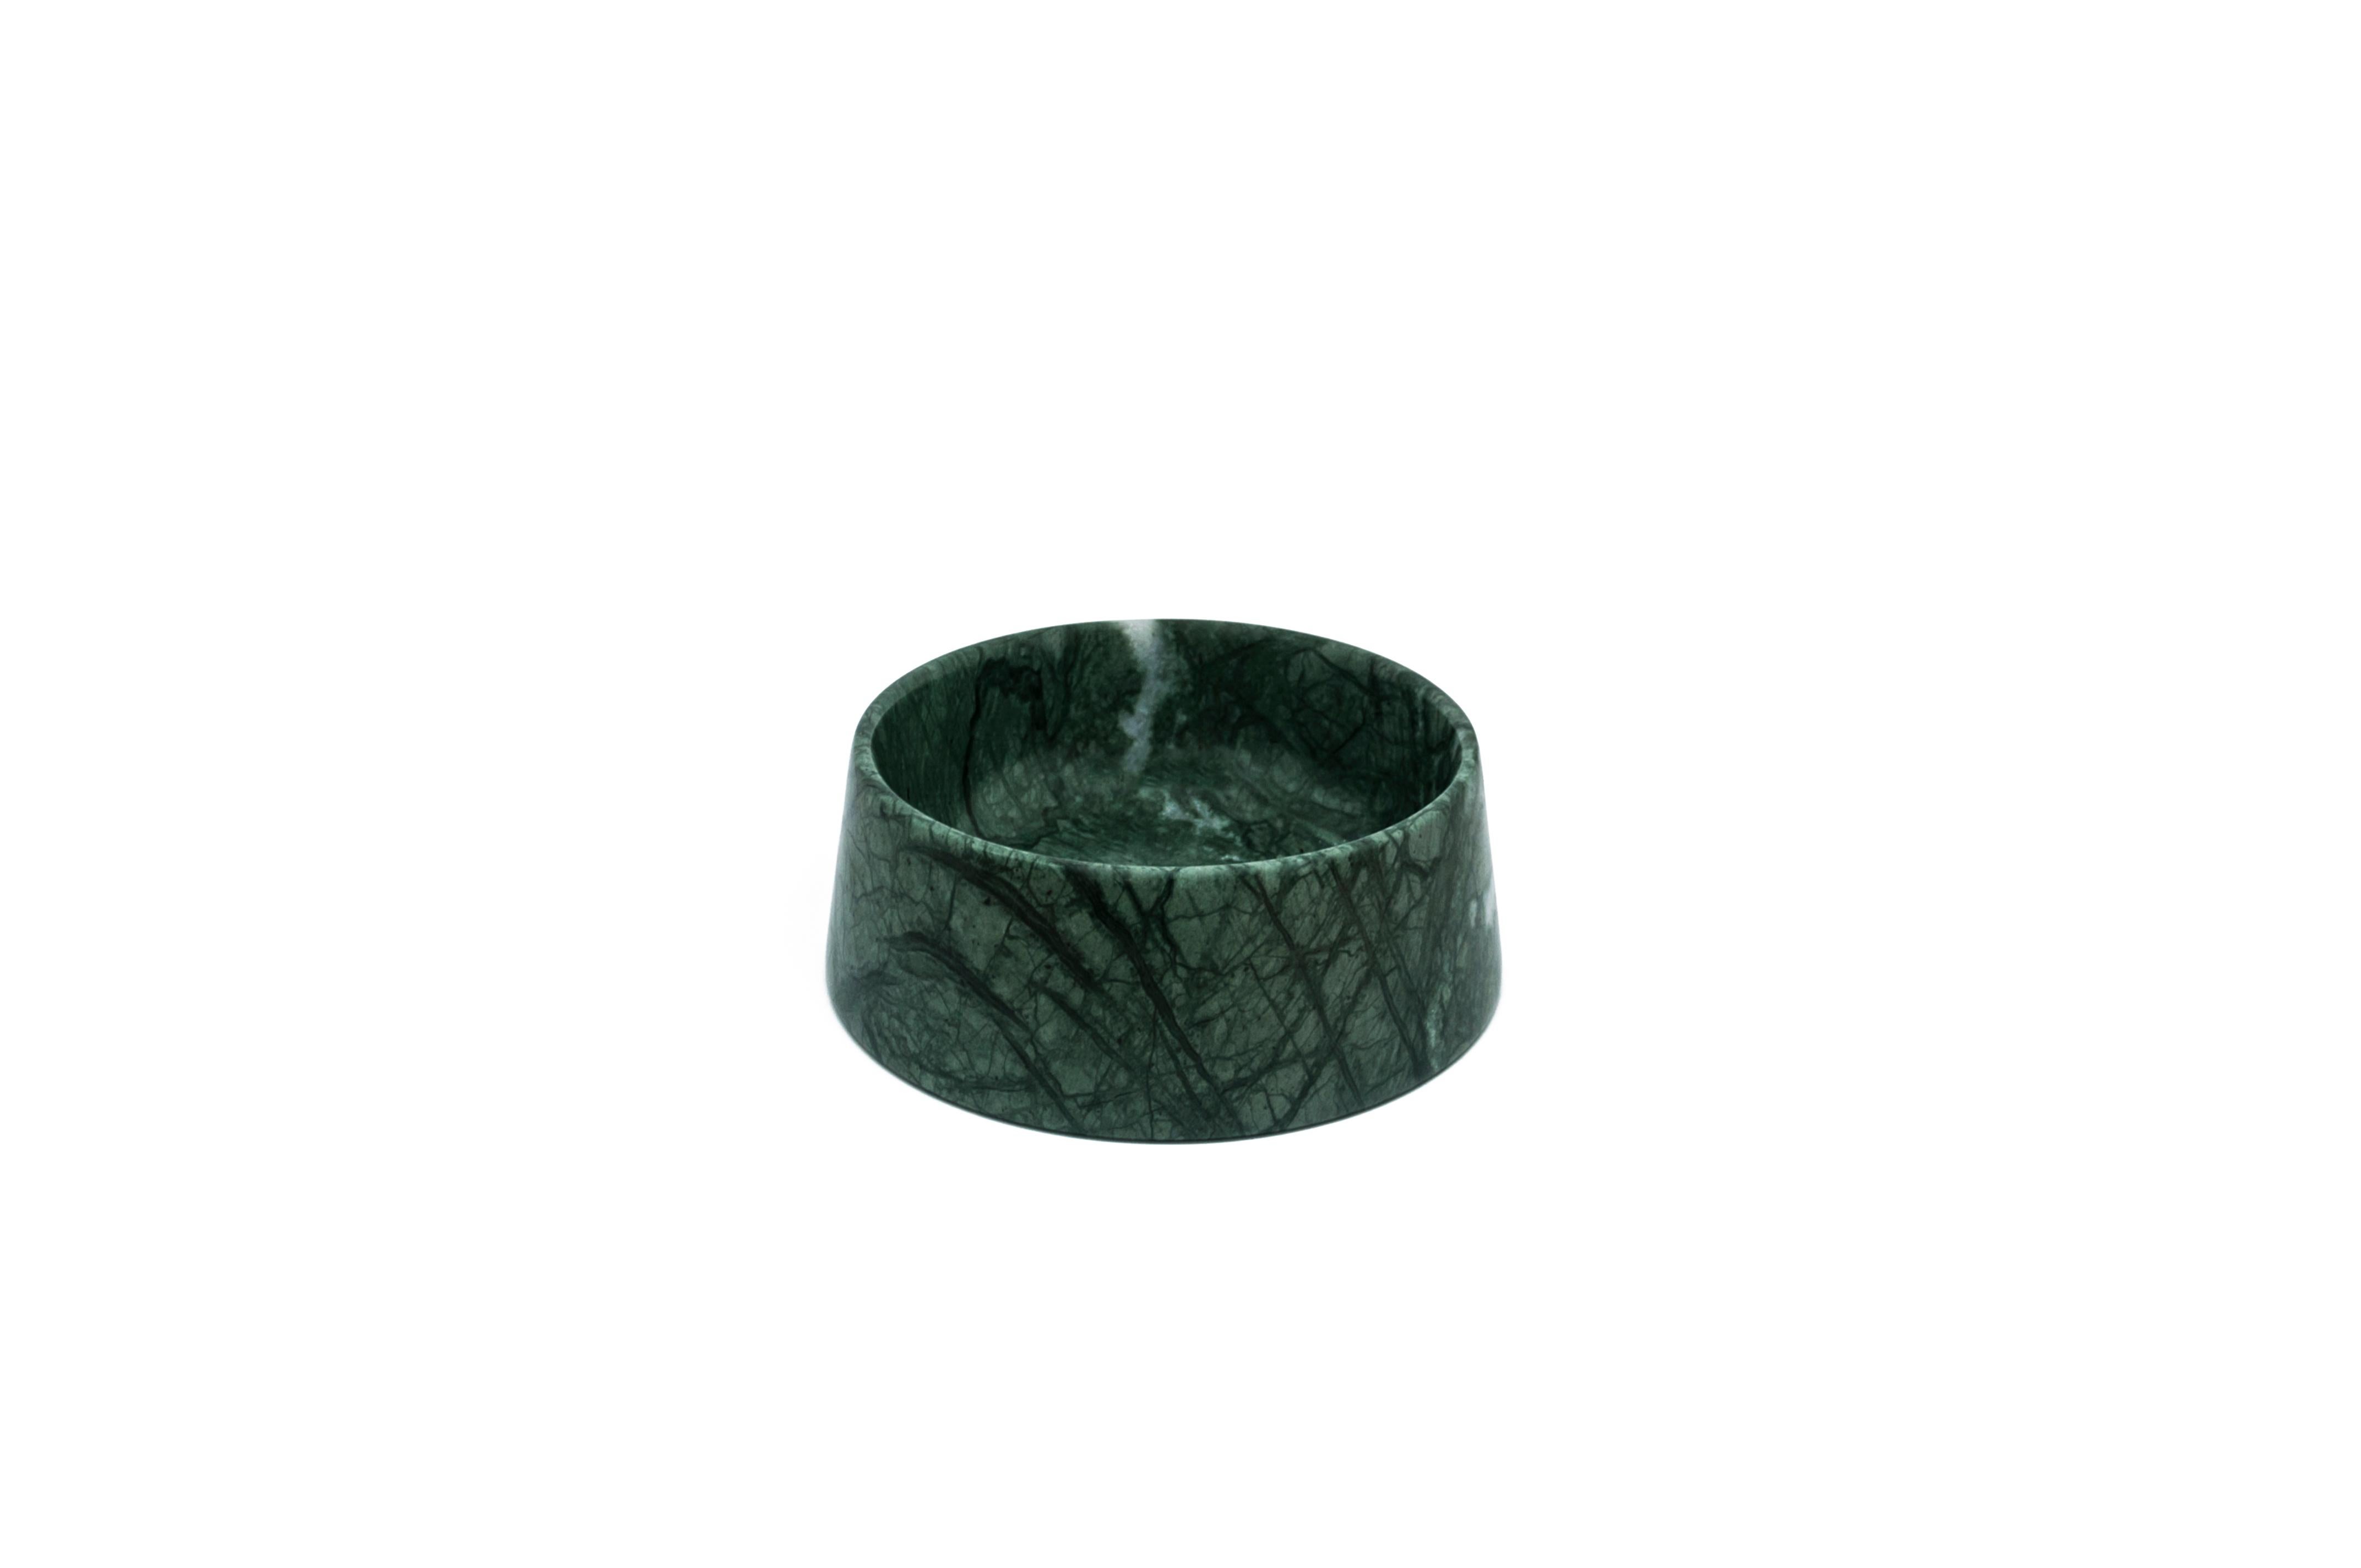 Green Guatemala marble bowl for cats and dogs, made in Italy, Carrara. Size Medium. Internal diameter 18 cm, external diameter 20, height 7.5 cm.
Each piece is in a way unique (every marble block is different in veins and shades) and handmade by